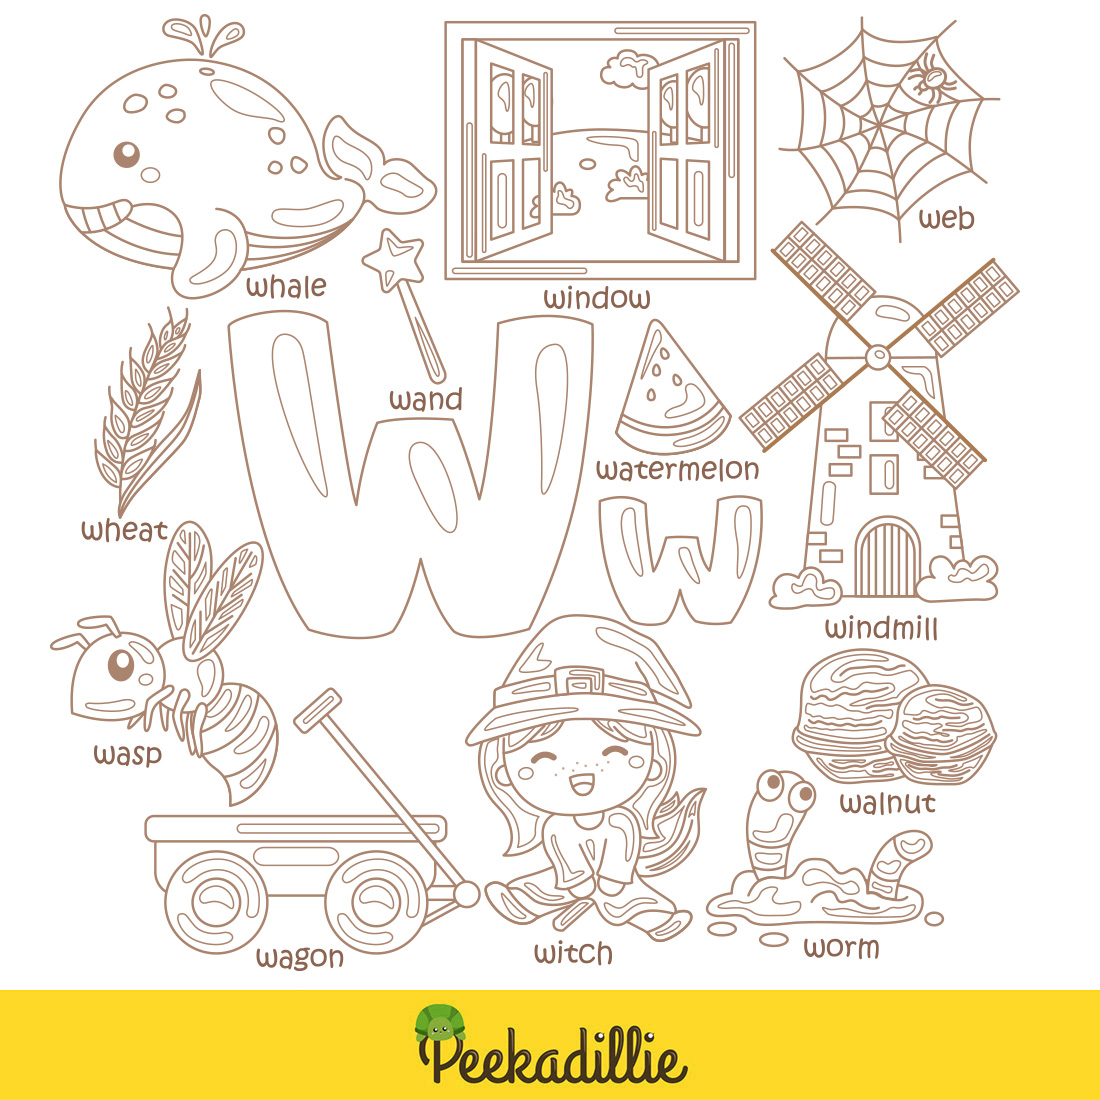 Alphabet W For Vocabulary School Letter Reading Writing Font Study Learning Student Toodler Kids Witch Wagon Web Worm Whale Watermelon Wheat Wand Window Windmill Walnut Wasp Cartoon Lesson Digital Stamp Outline preview image.